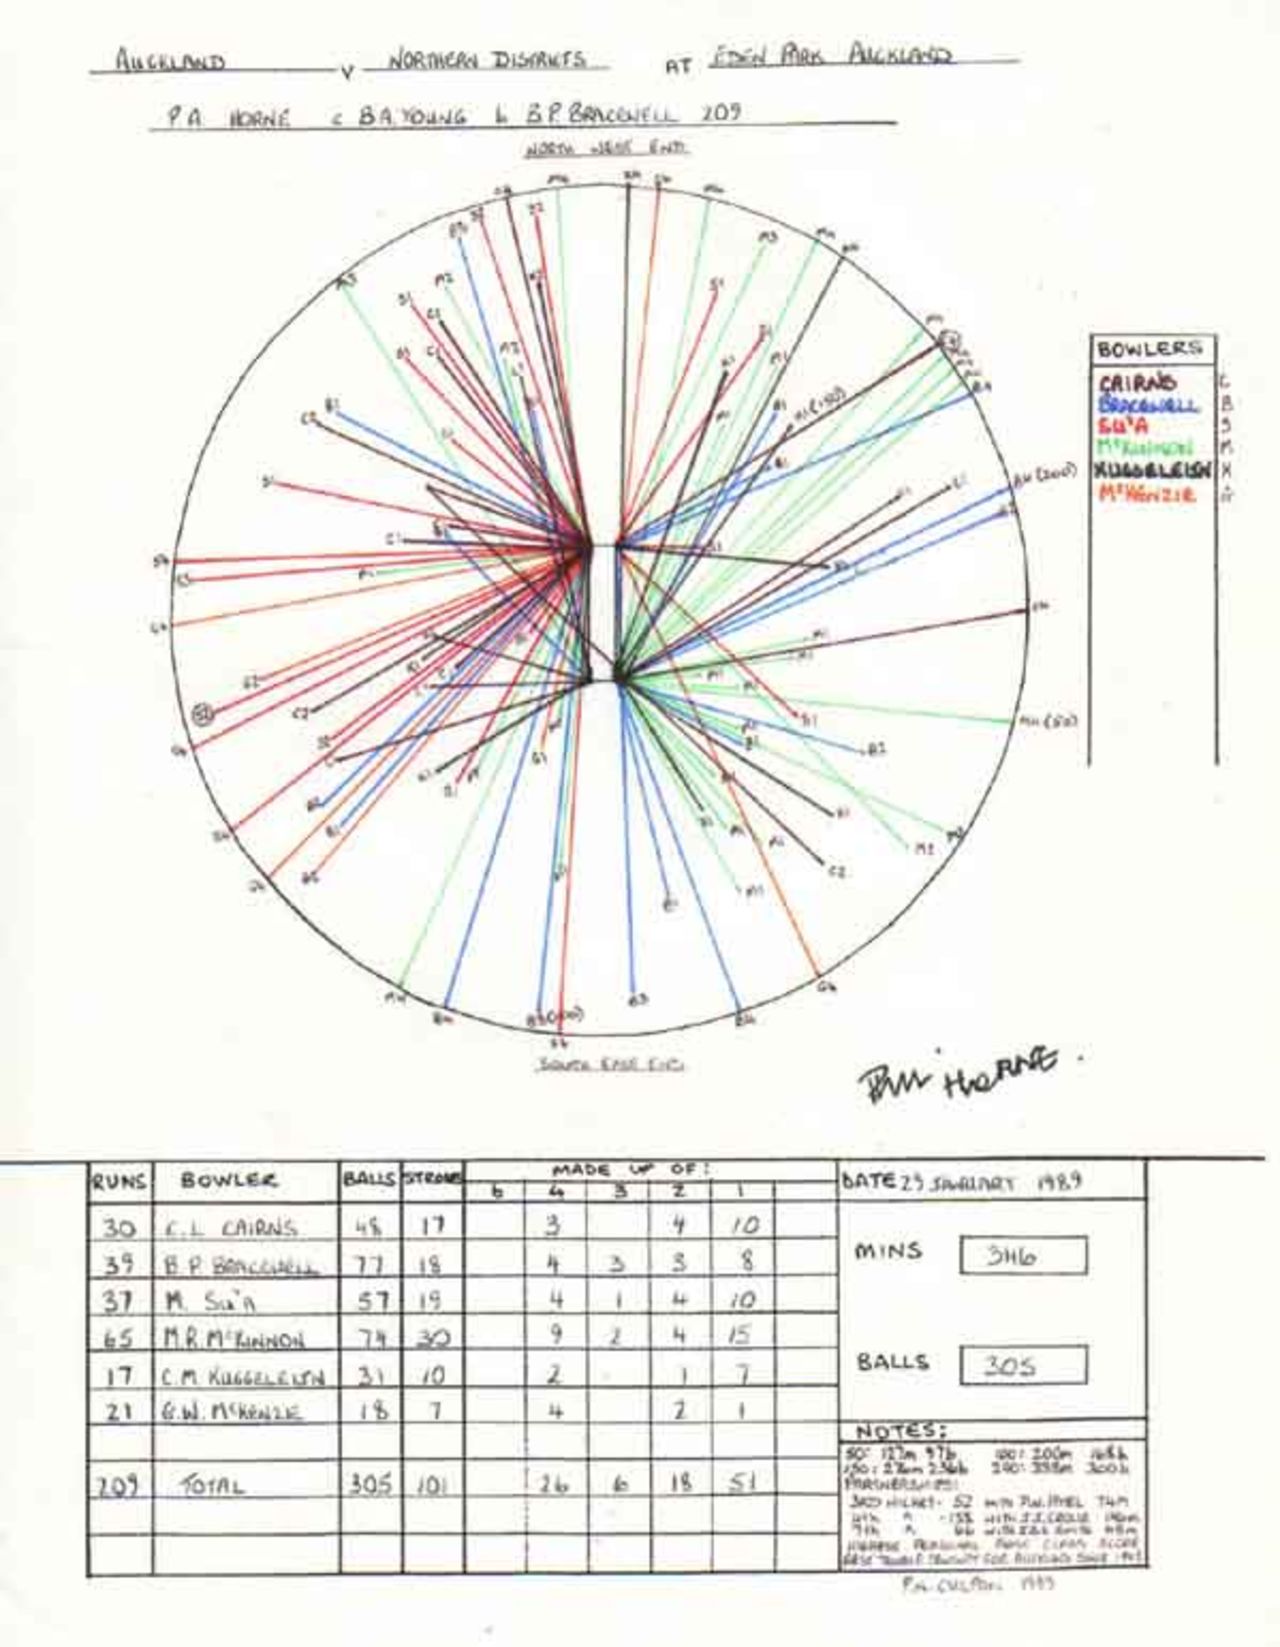 Wagon Wheel of Phil Horne's 209 v Northern Districts, Eden Park, Auckland 29th January 1989